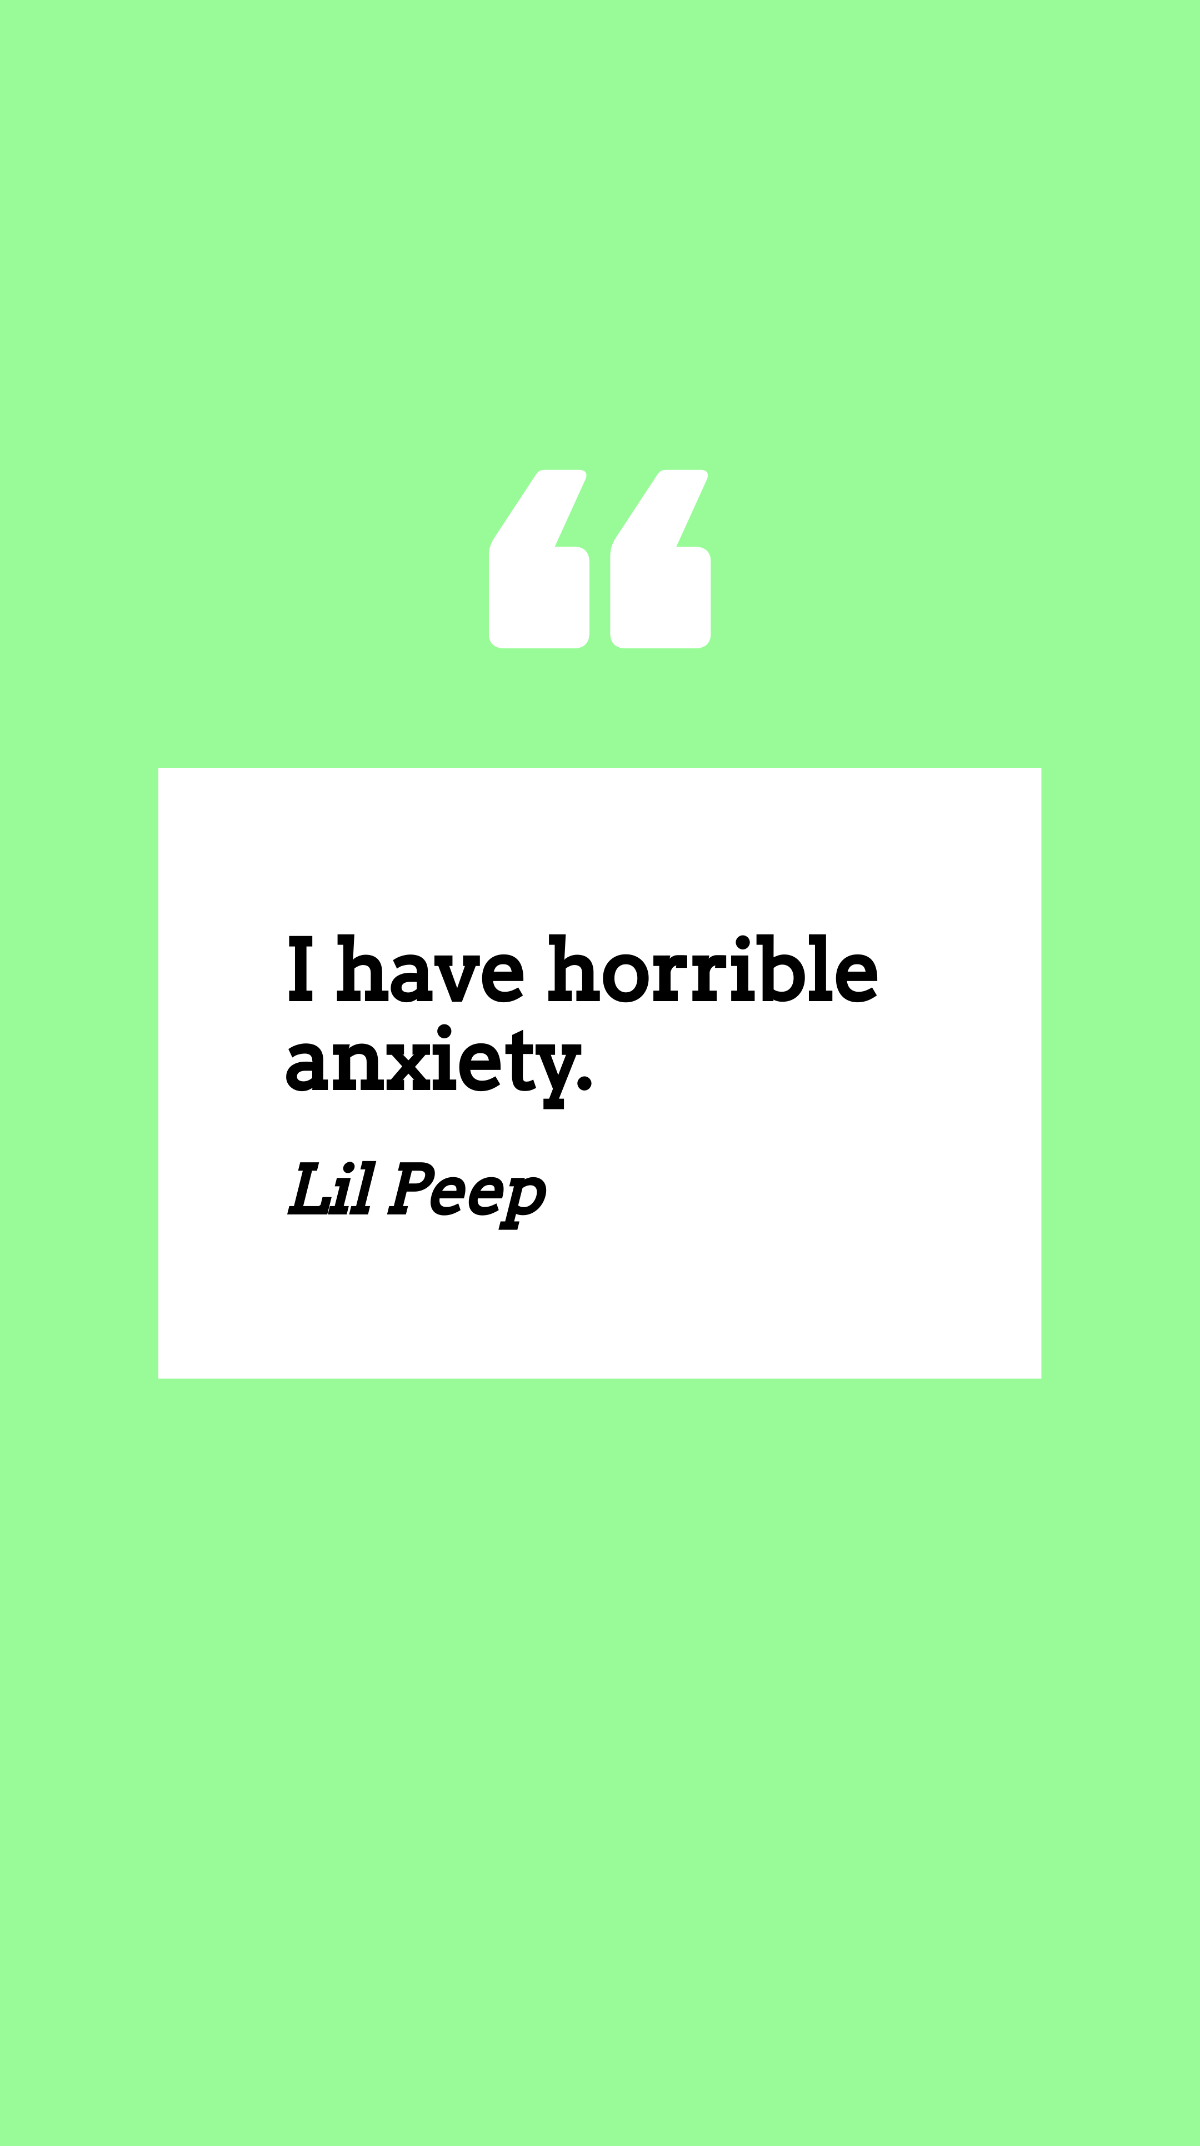 Lil Peep - I have horrible anxiety.